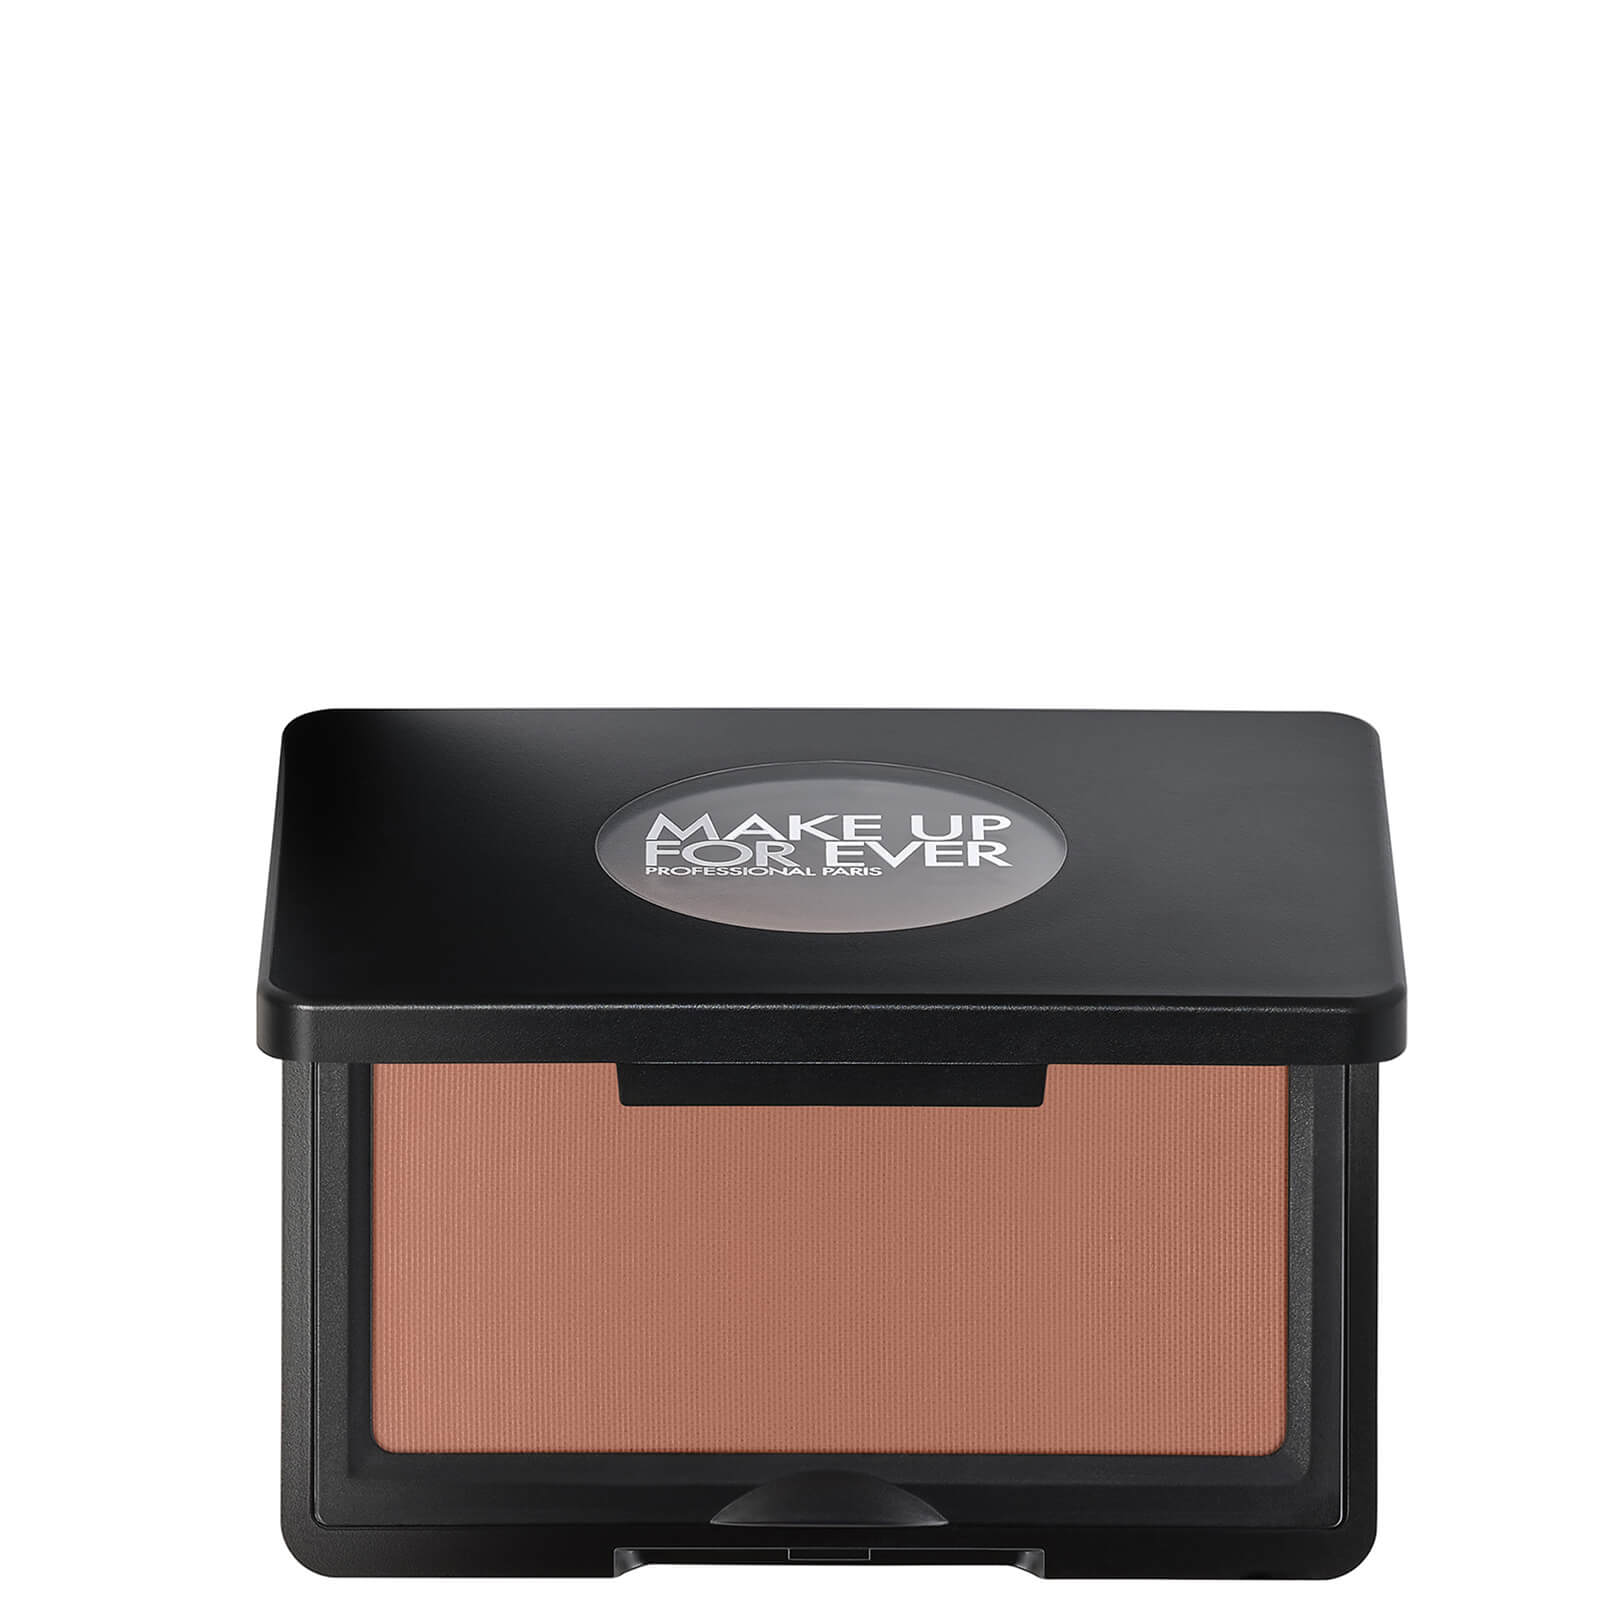 MAKE UP FOR EVER Artist Face Powders Sculpt 4g (Various Shades) - S420 - Trendy Truffle